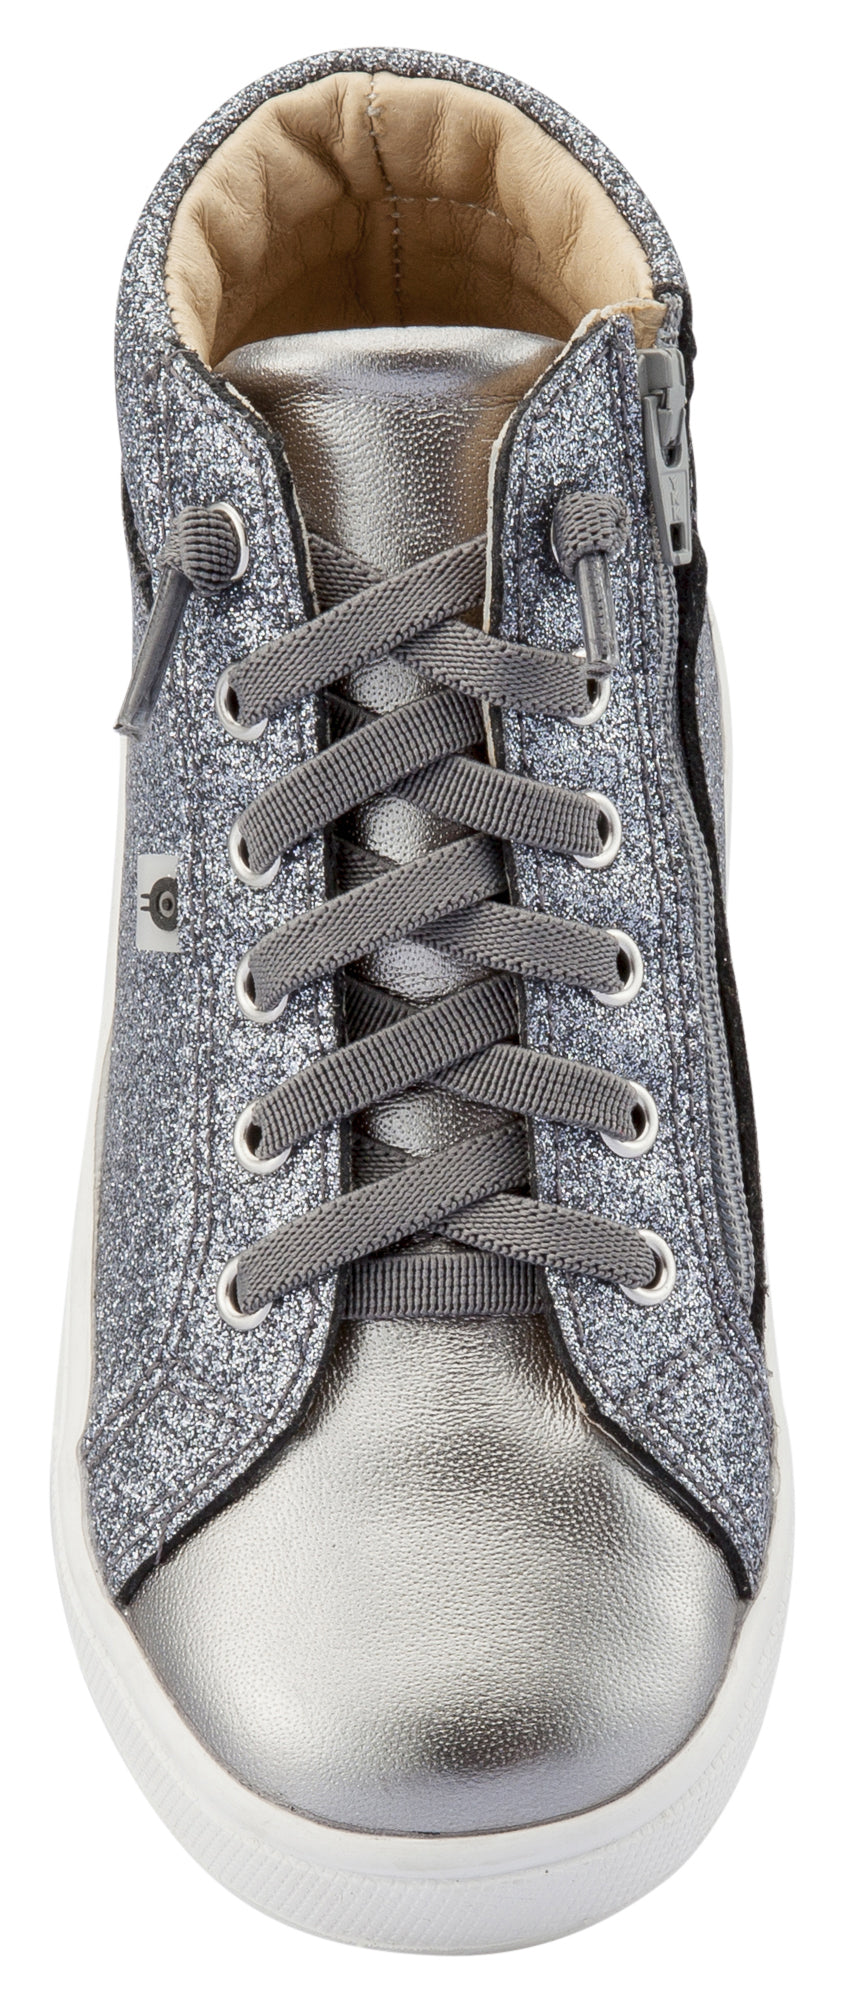 Old Soles Girl's Ring Sneakers, Glam Gunmetal / Rich Silver